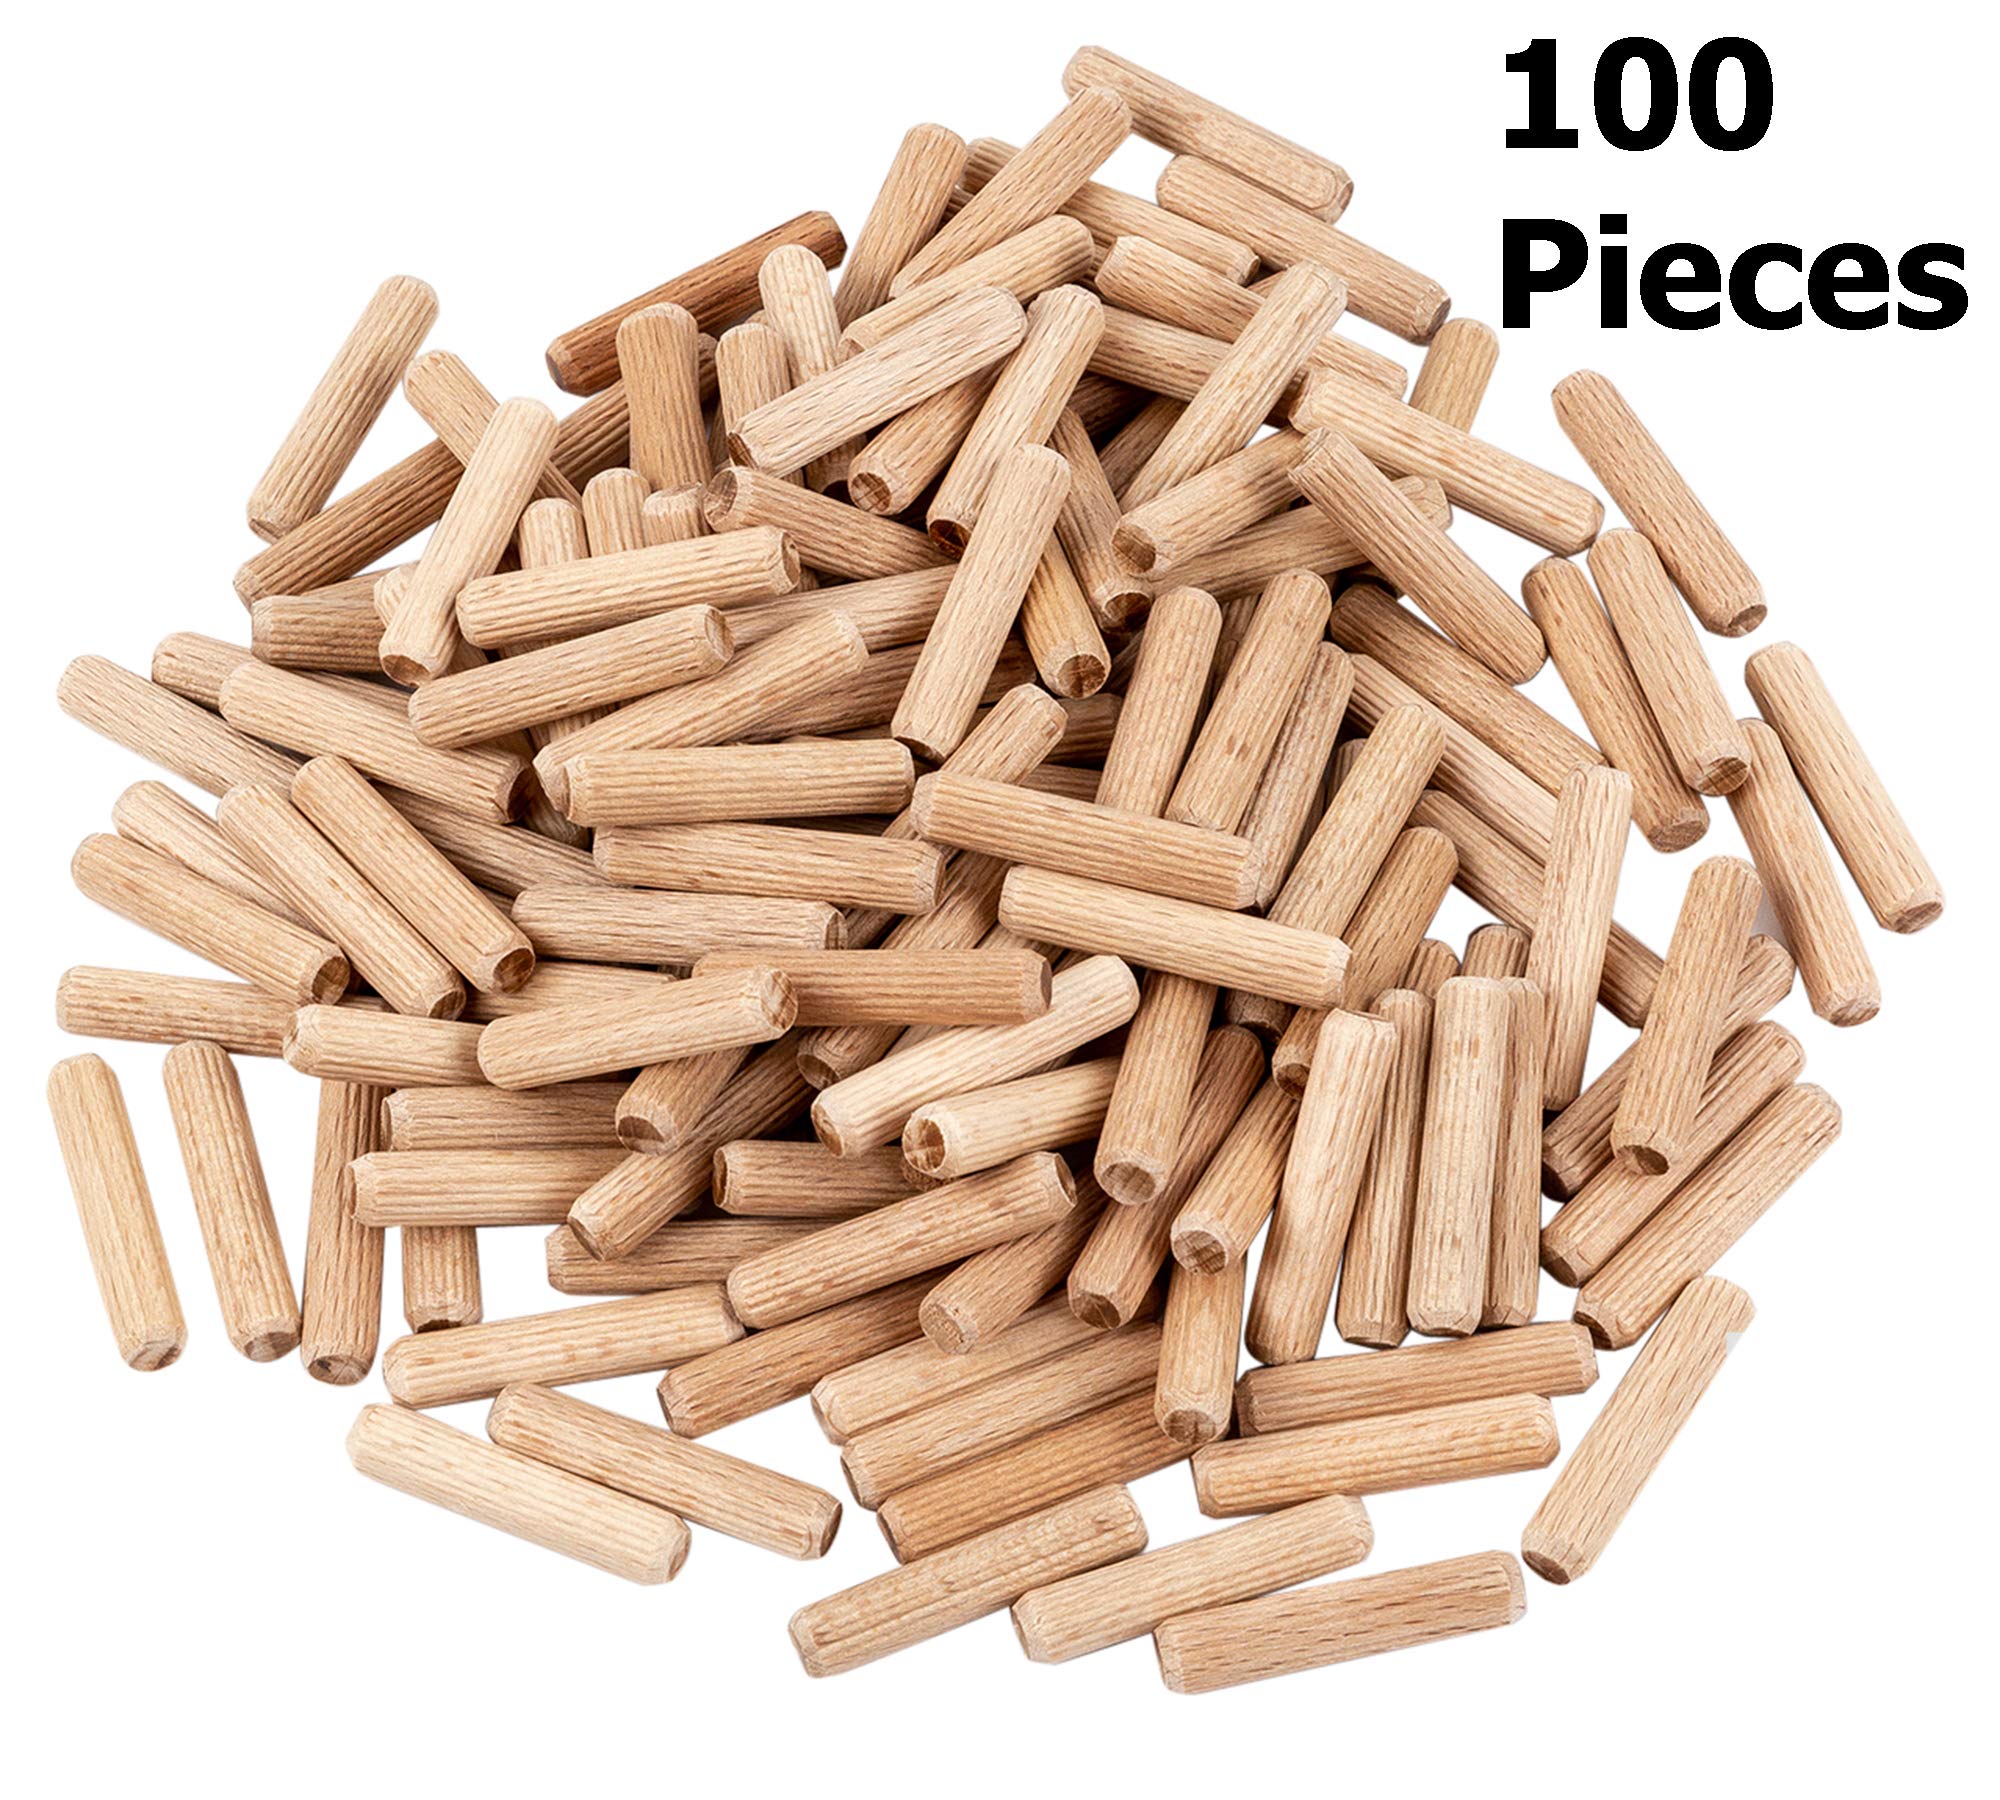 BICB Fluted Wood Kiln Dowel Pins, 1/4" x 1-1/4"- 100 Pieces , Made of Beechwood